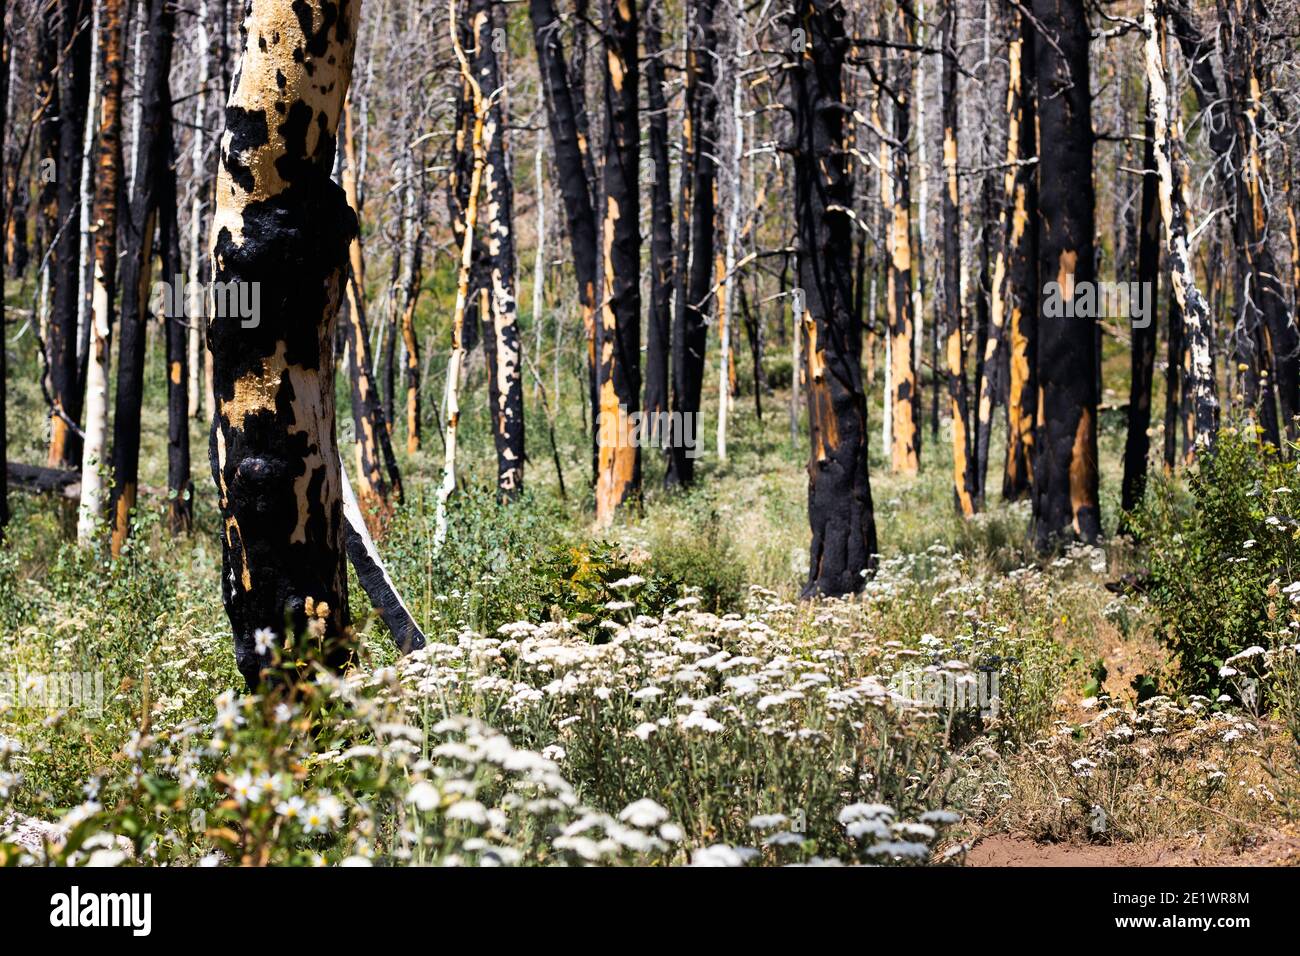 Mountainside recovering from wildfire, burnt remains of trees Stock Photo